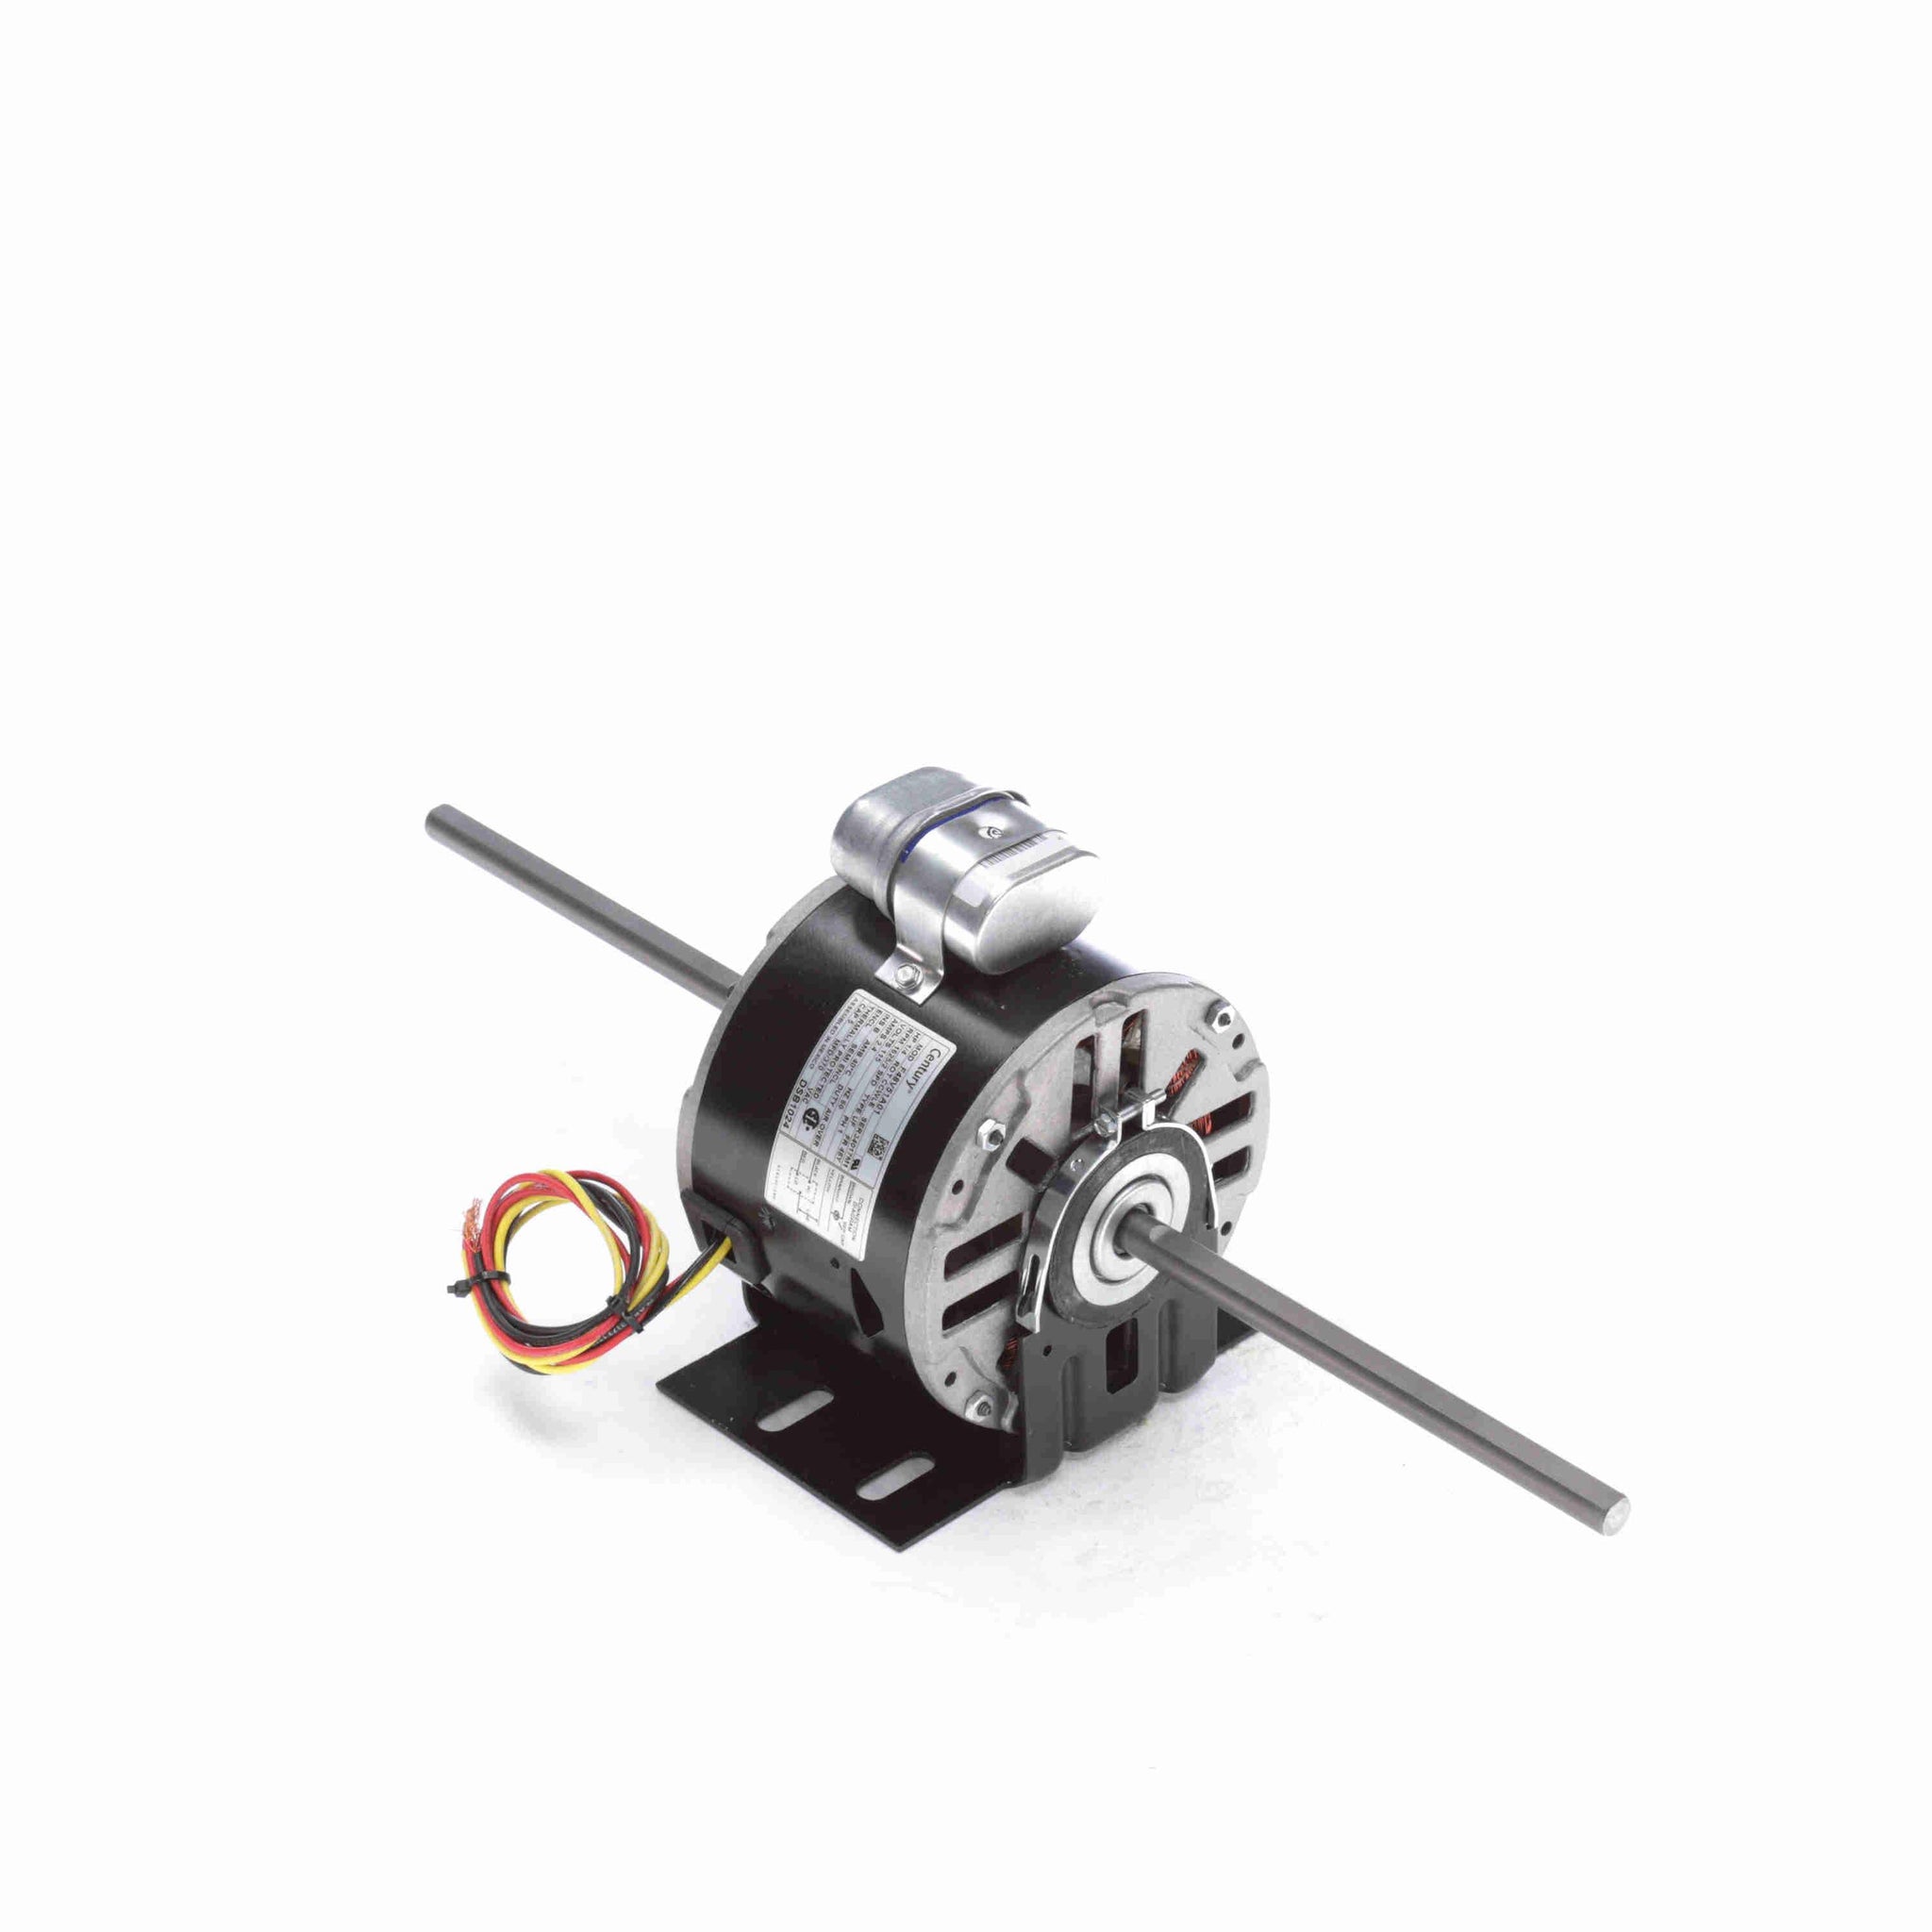 DSB1024 - 1/4 HP Fan Coil / Room Air Conditioner Motor, 1625 RPM, 2 Speed, 115 Volts, 48 Frame, Semi Enclosed - Hardware & Moreee